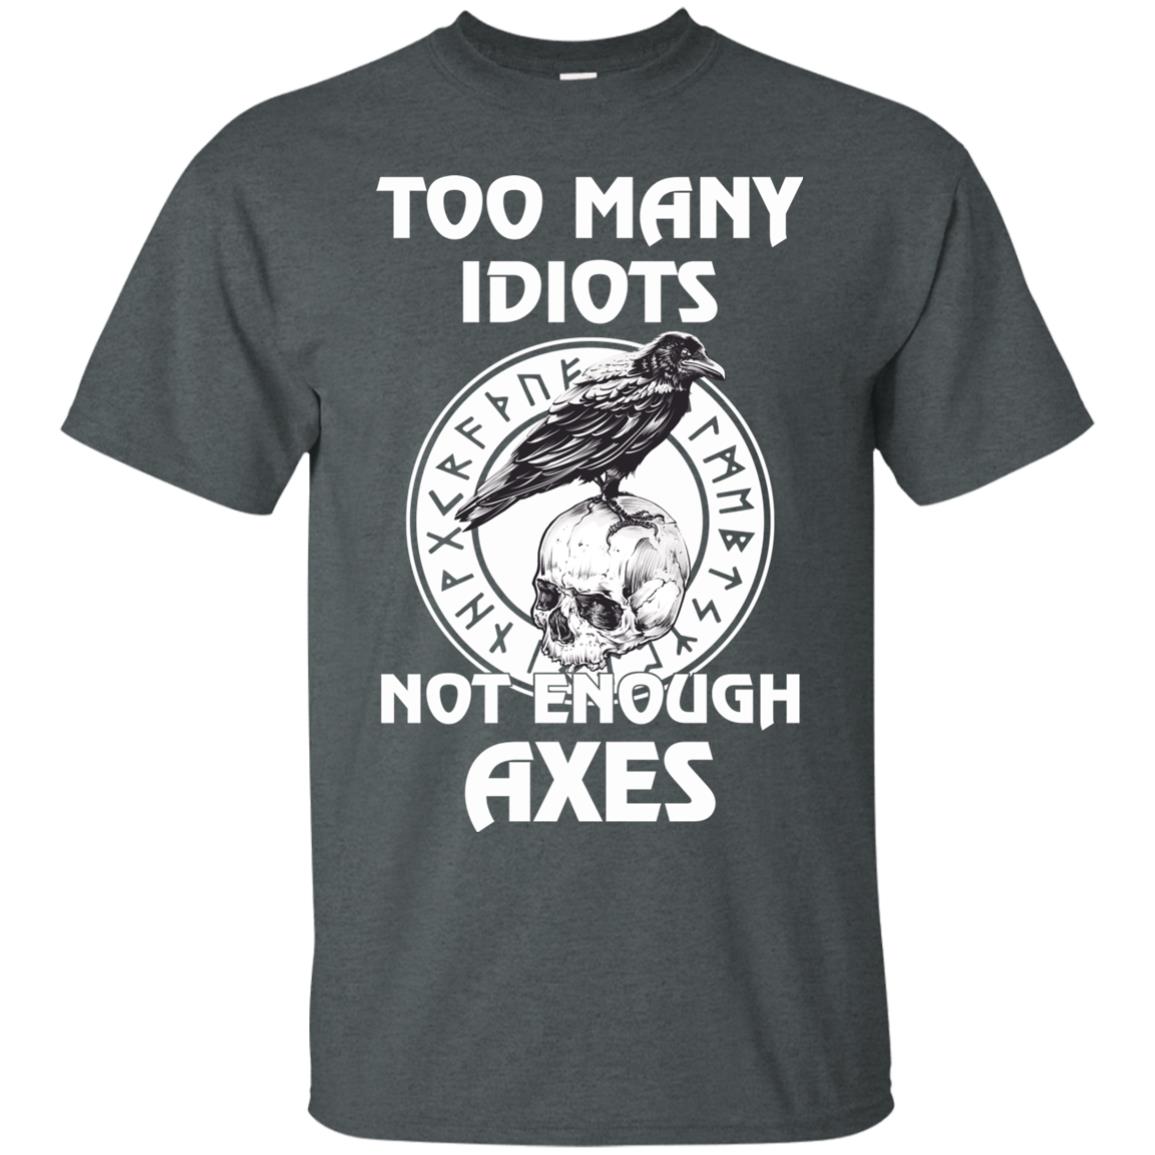 Too many idiots not enough axes t shirt, long sleeve, hoodie ...